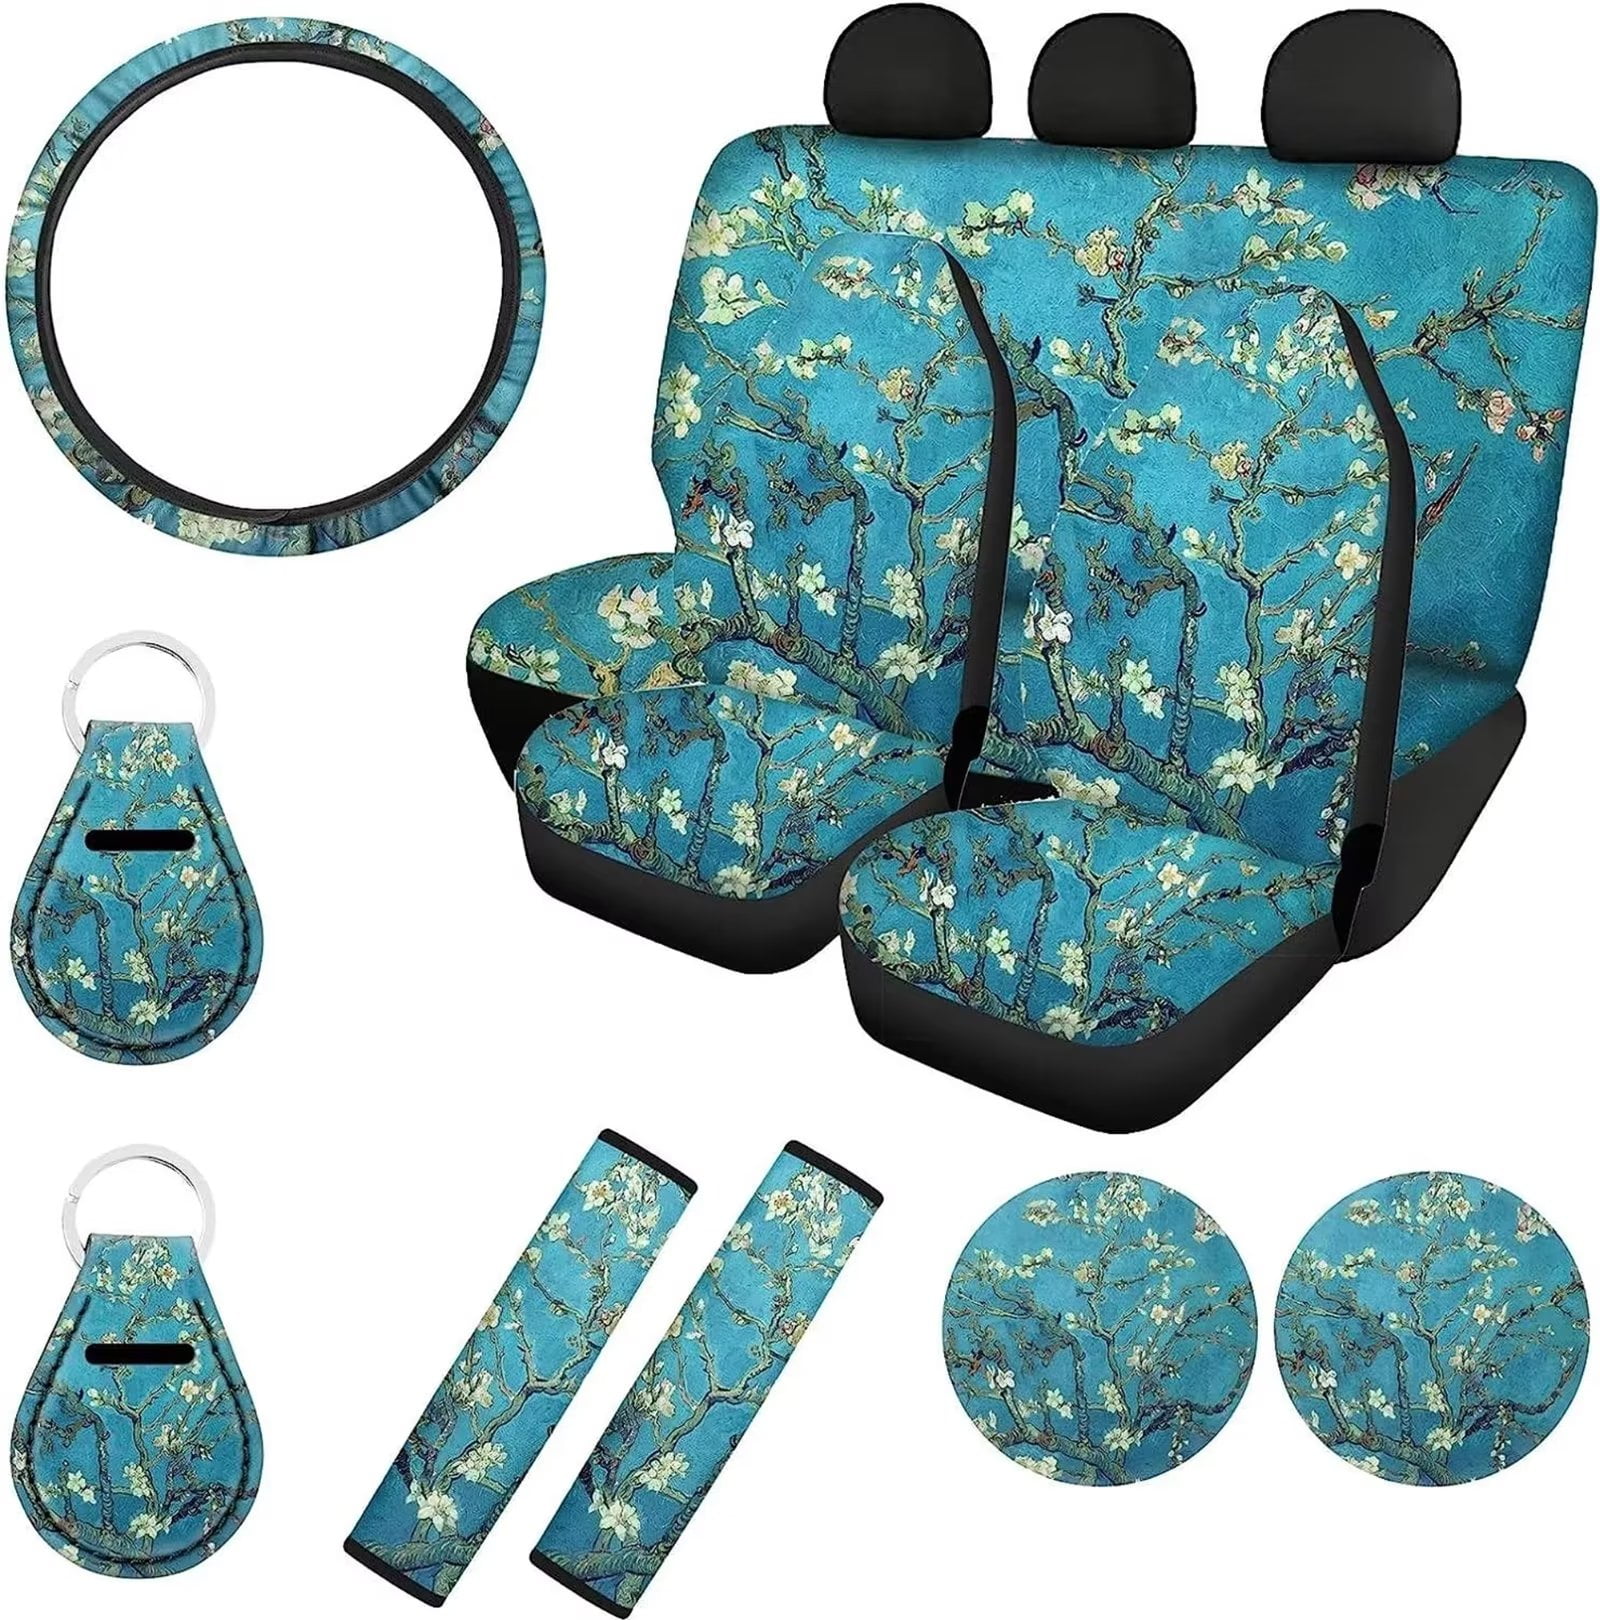 Pzuqiu Car Seat Covers and Accessories Girly Floral Front Rear Seat Covers+  Steering Wheel Cover+ Seatbelt Pads+ Coasters+ Keychains for Women SUV